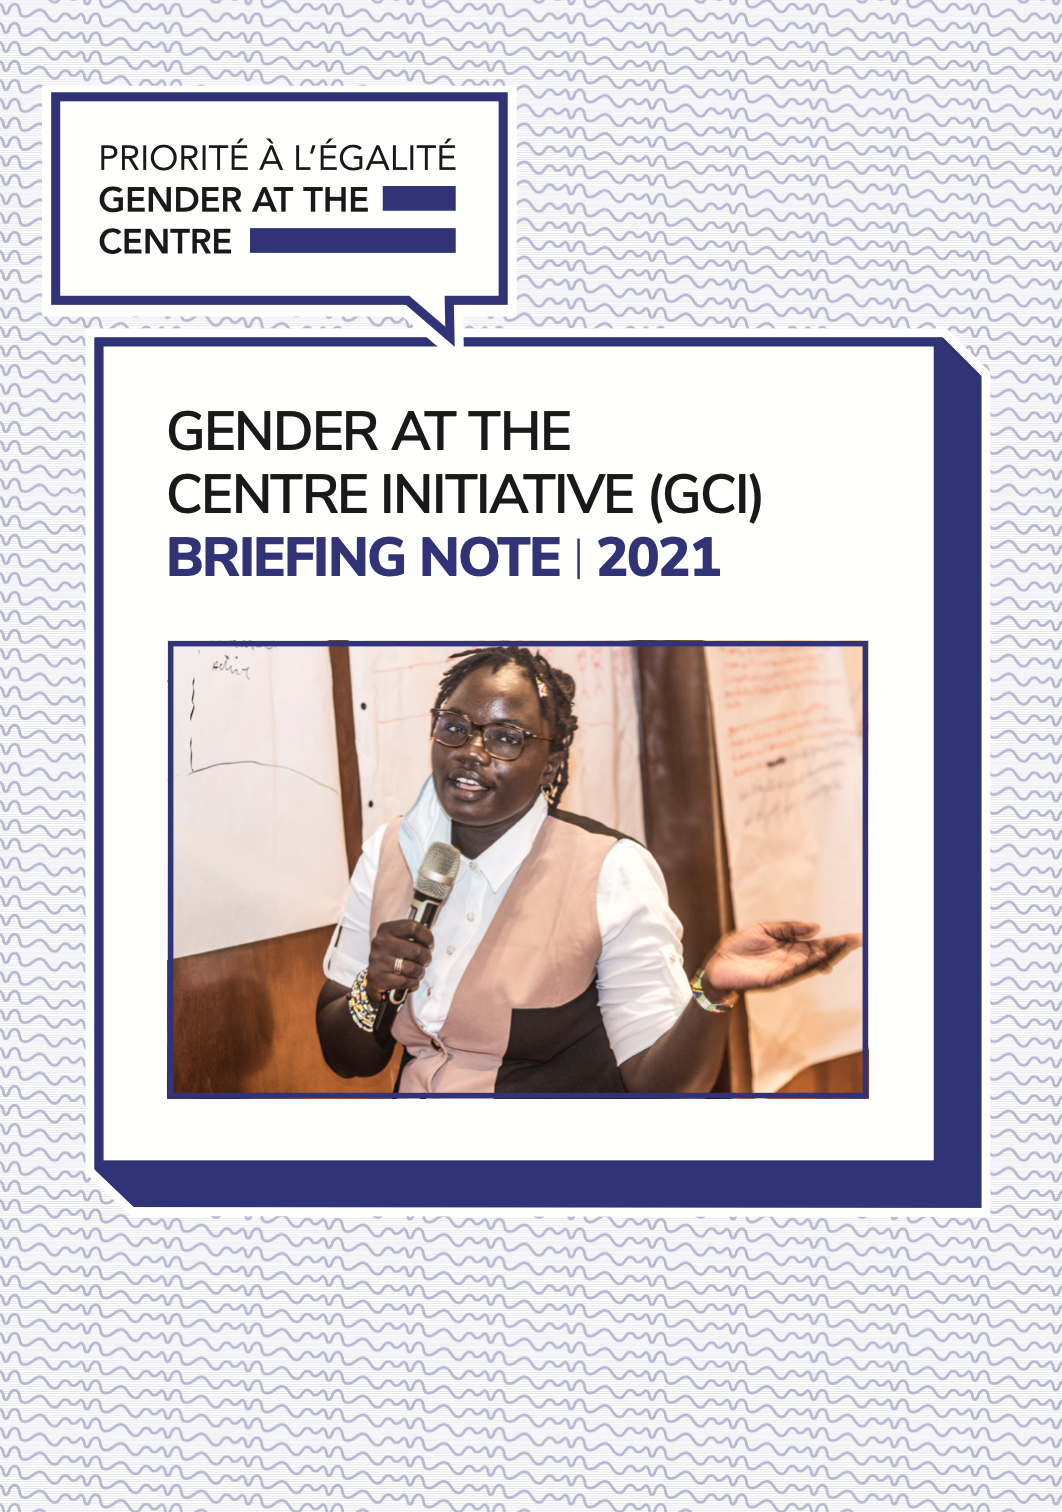 Gender at the Centre Initiative (GCI) Briefing Note